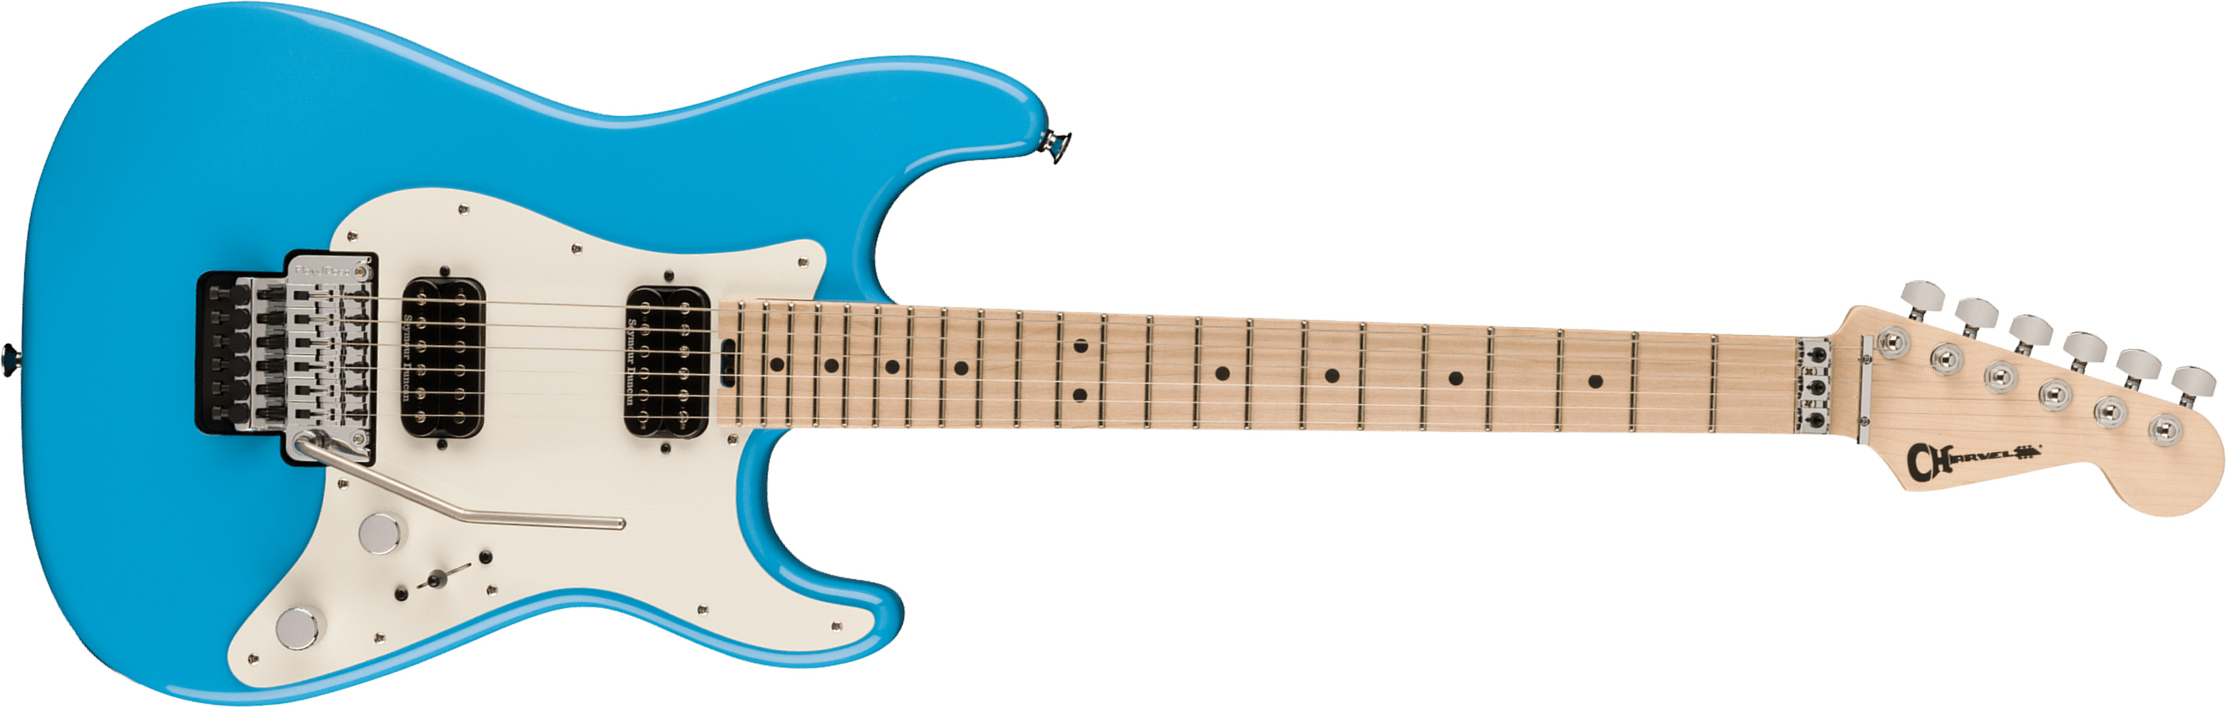 Charvel So-cal Style 1 Hh Fr M Pro-mod 2h Seymour Duncan Mn - Infinity Blue - Str shape electric guitar - Main picture